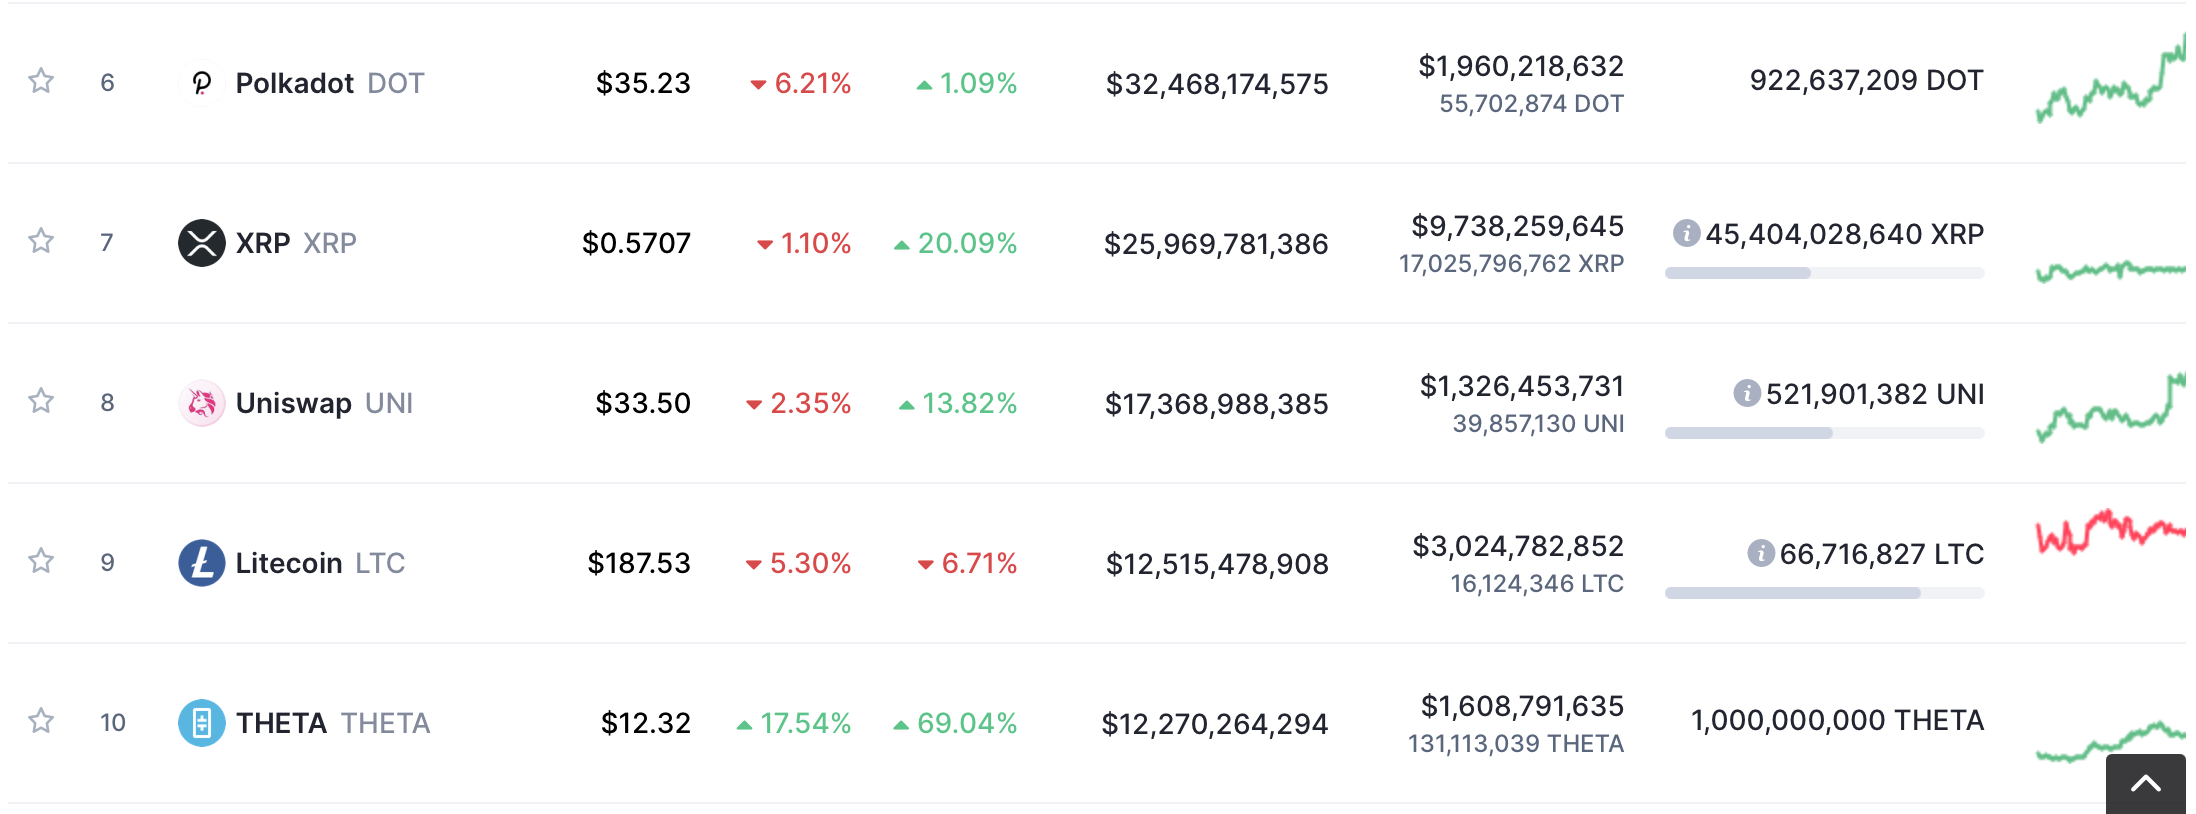 THETA token climbed to 10th place in terms of capitalization